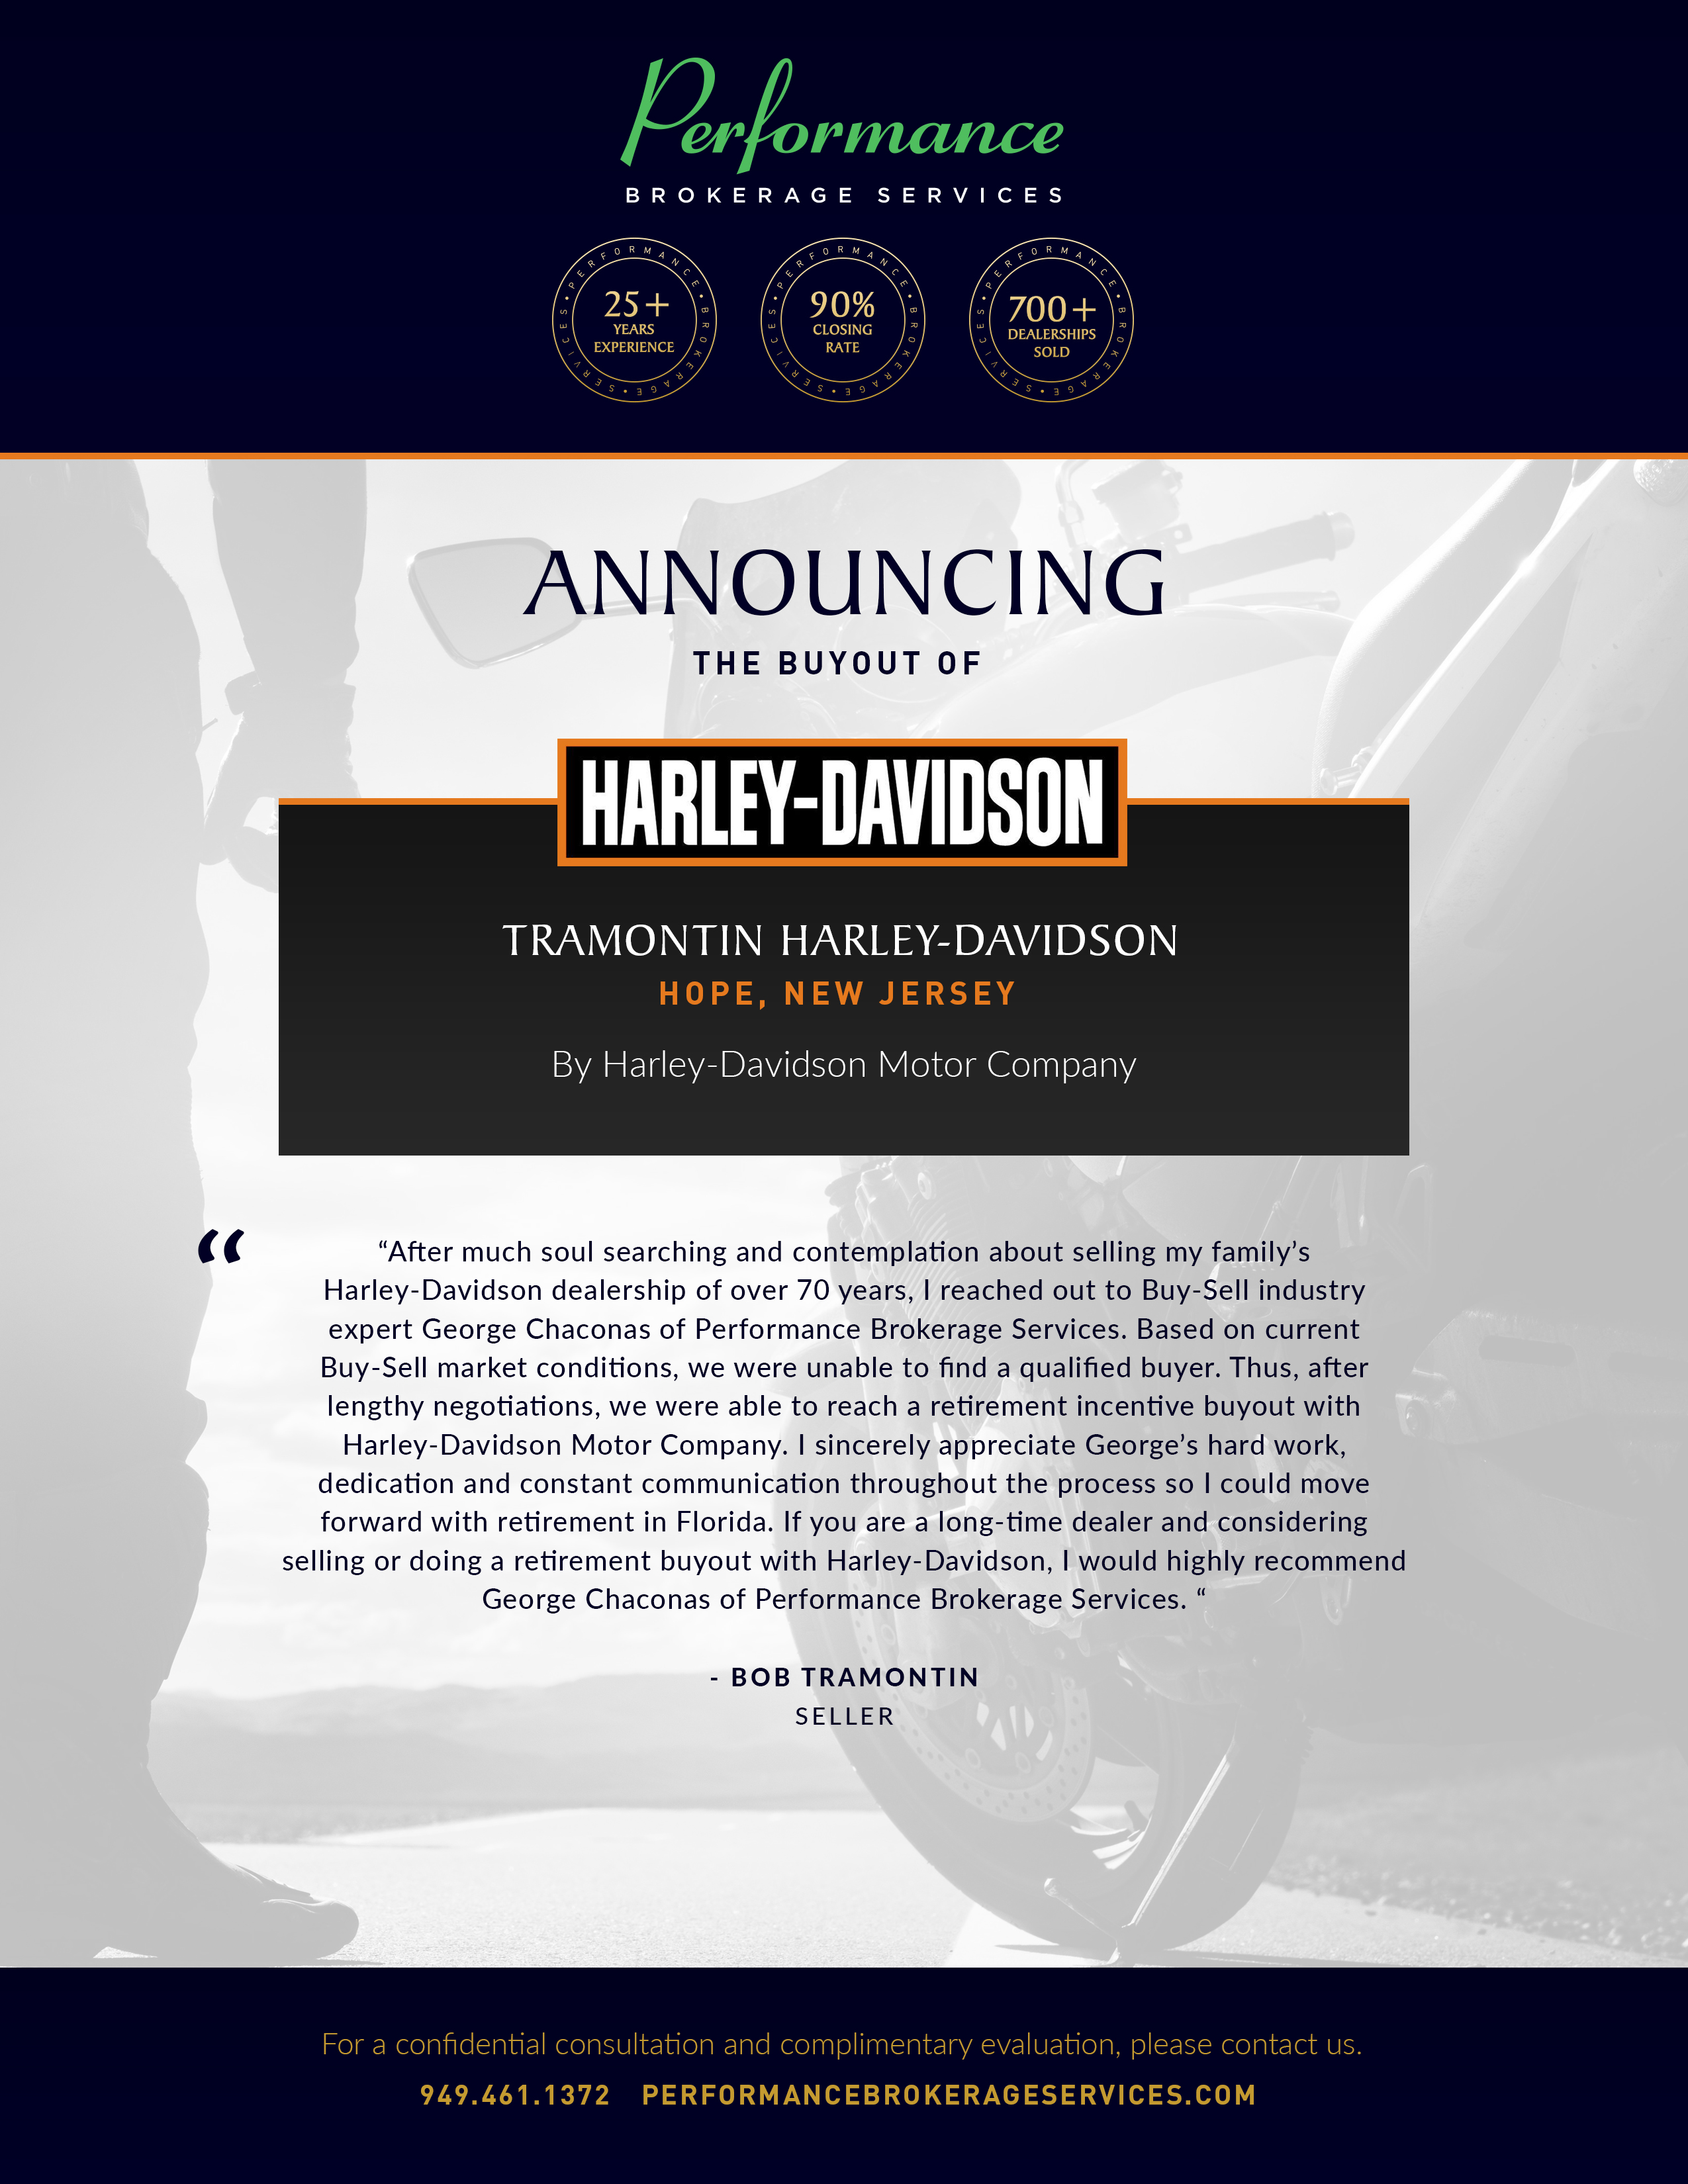 Performance Brokerage Services Announces Buyout of Tramontin Harley-Davidson